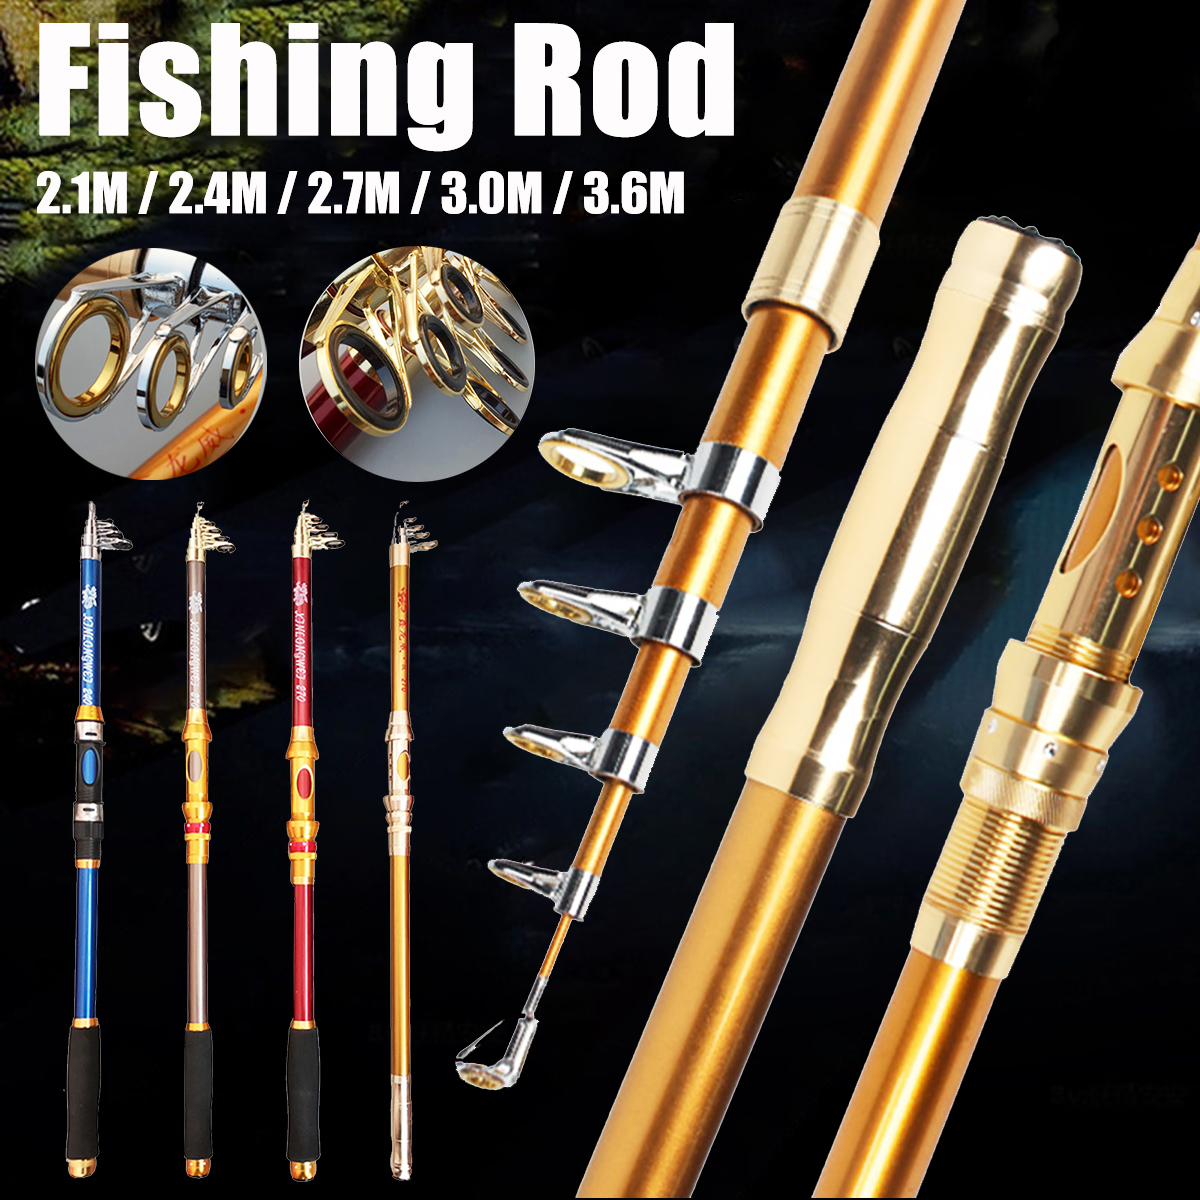 2124273036M-Telescopic-Fishing-Rod-Ultra-light-and-Sturdy-Long-distance-Casting-Rod-Outdoor-Fishing--1889795-1